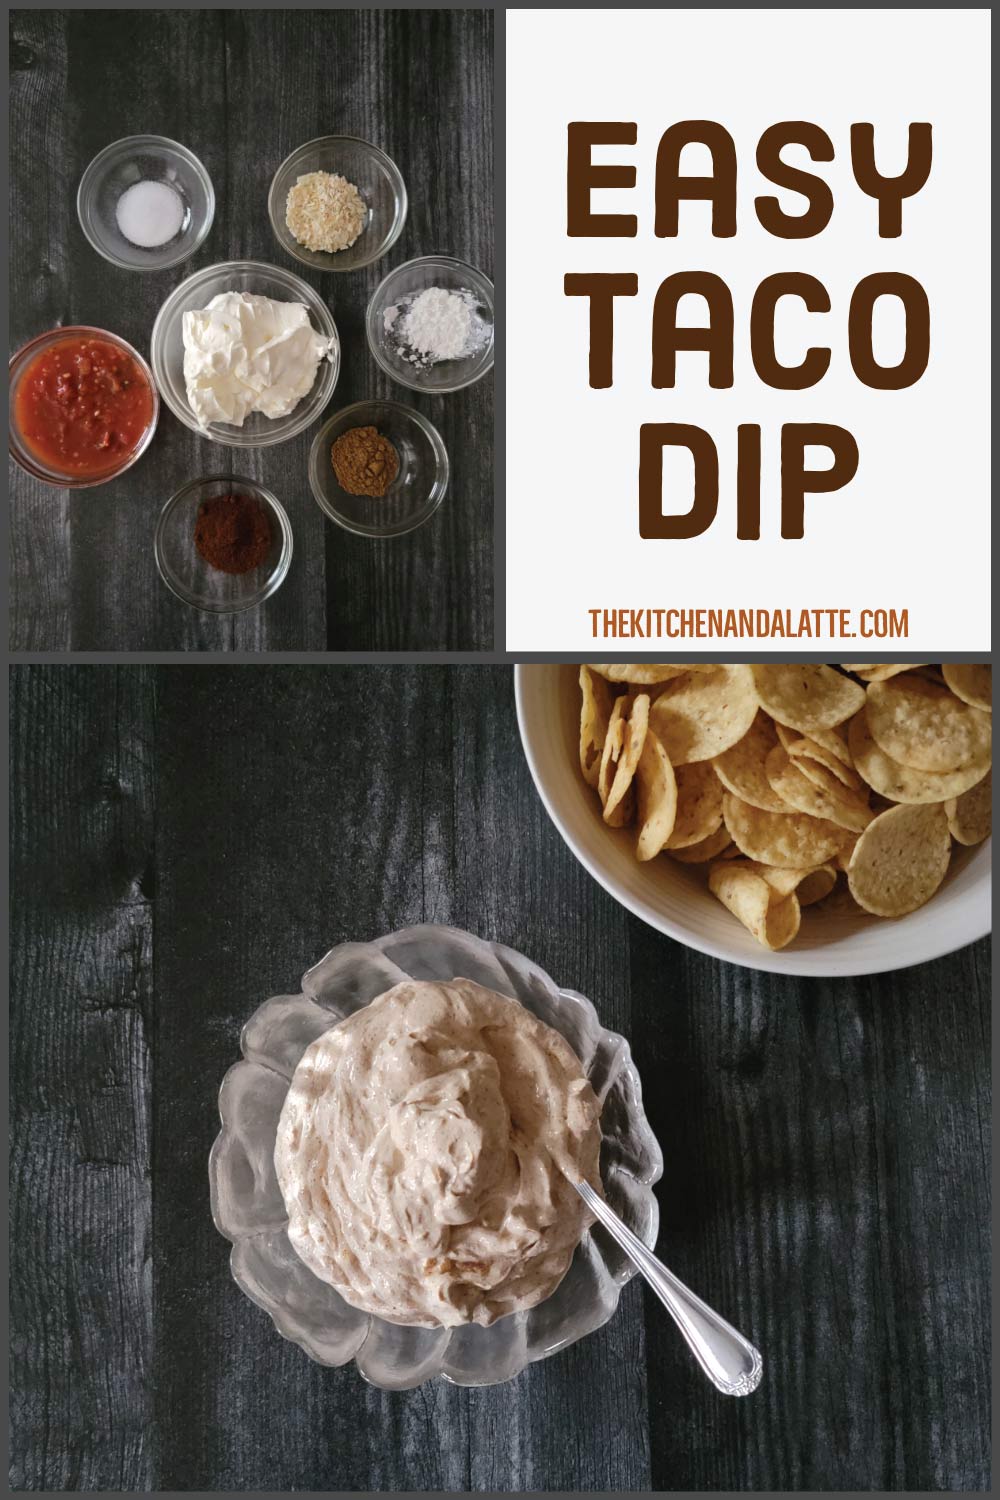 Easy taco dip Pinterest graphic - dip in a small serving bowl with chips next to it and ingredients for dipped prepped in bowls.